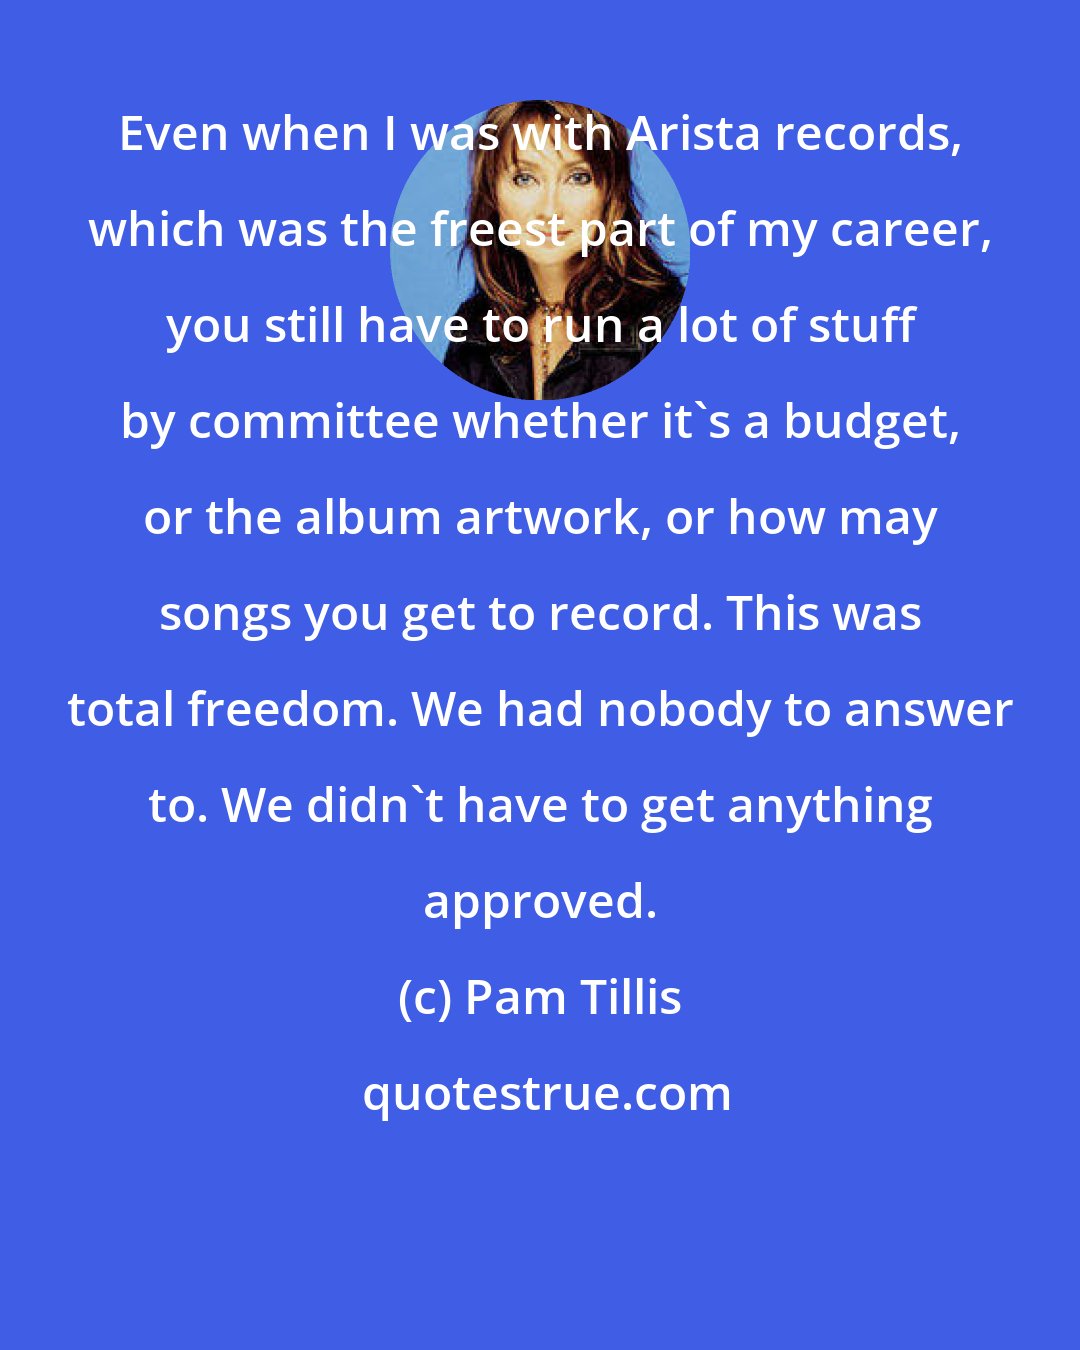 Pam Tillis: Even when I was with Arista records, which was the freest part of my career, you still have to run a lot of stuff by committee whether it's a budget, or the album artwork, or how may songs you get to record. This was total freedom. We had nobody to answer to. We didn't have to get anything approved.